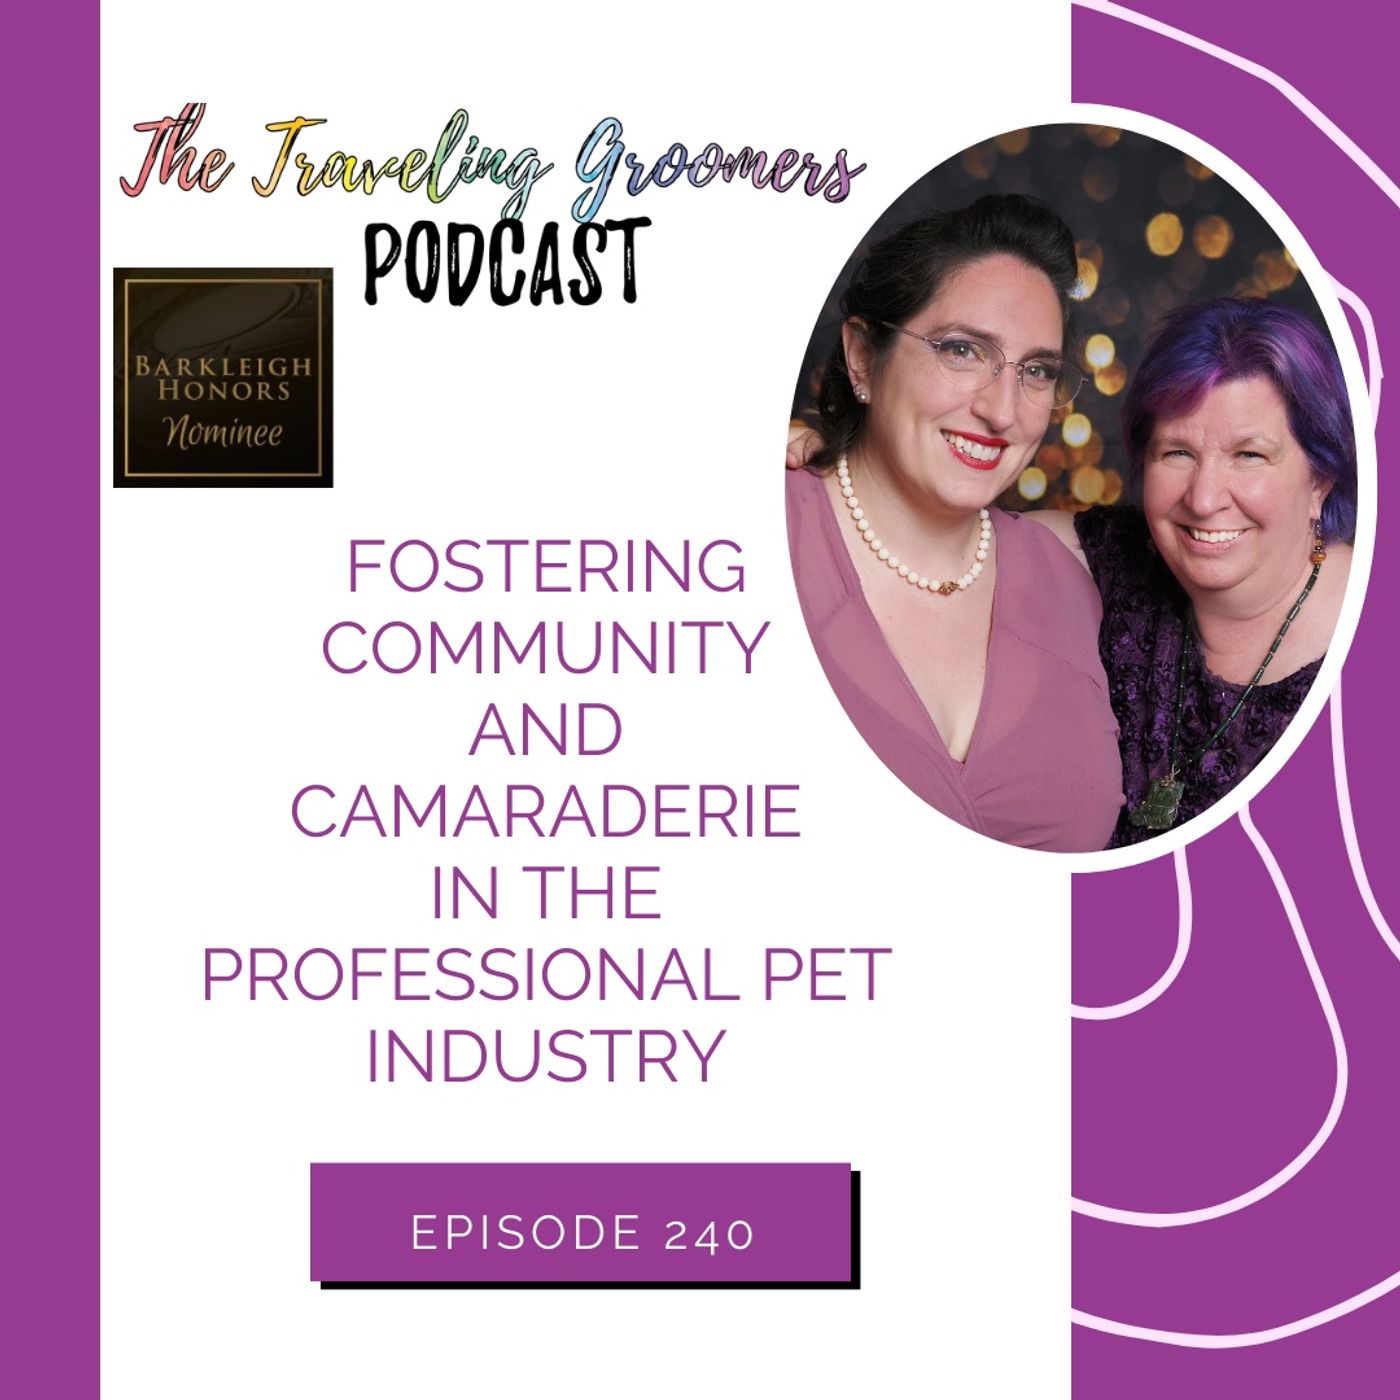 Fostering Community And Camaraderie In The Professional Pet Industry